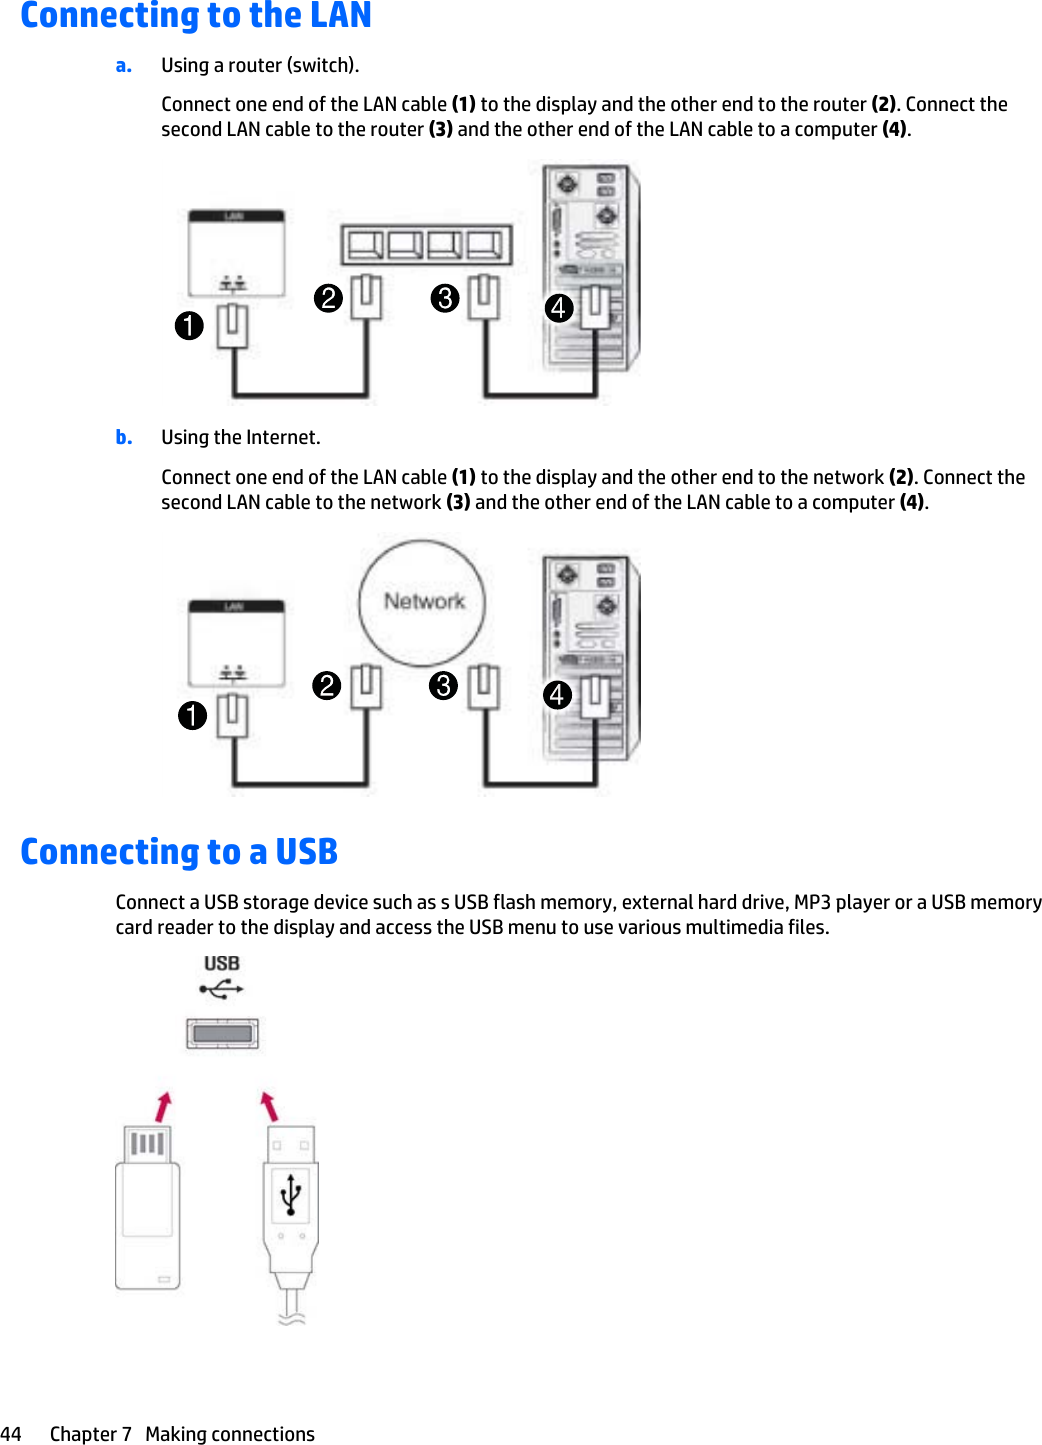 Connecting to the LANa. Using a router (switch).Connect one end of the LAN cable (1) to the display and the other end to the router (2). Connect thesecond LAN cable to the router (3) and the other end of the LAN cable to a computer (4).b. Using the Internet.Connect one end of the LAN cable (1) to the display and the other end to the network (2). Connect thesecond LAN cable to the network (3) and the other end of the LAN cable to a computer (4).Connecting to a USBConnect a USB storage device such as s USB flash memory, external hard drive, MP3 player or a USB memorycard reader to the display and access the USB menu to use various multimedia files.44 Chapter 7   Making connections